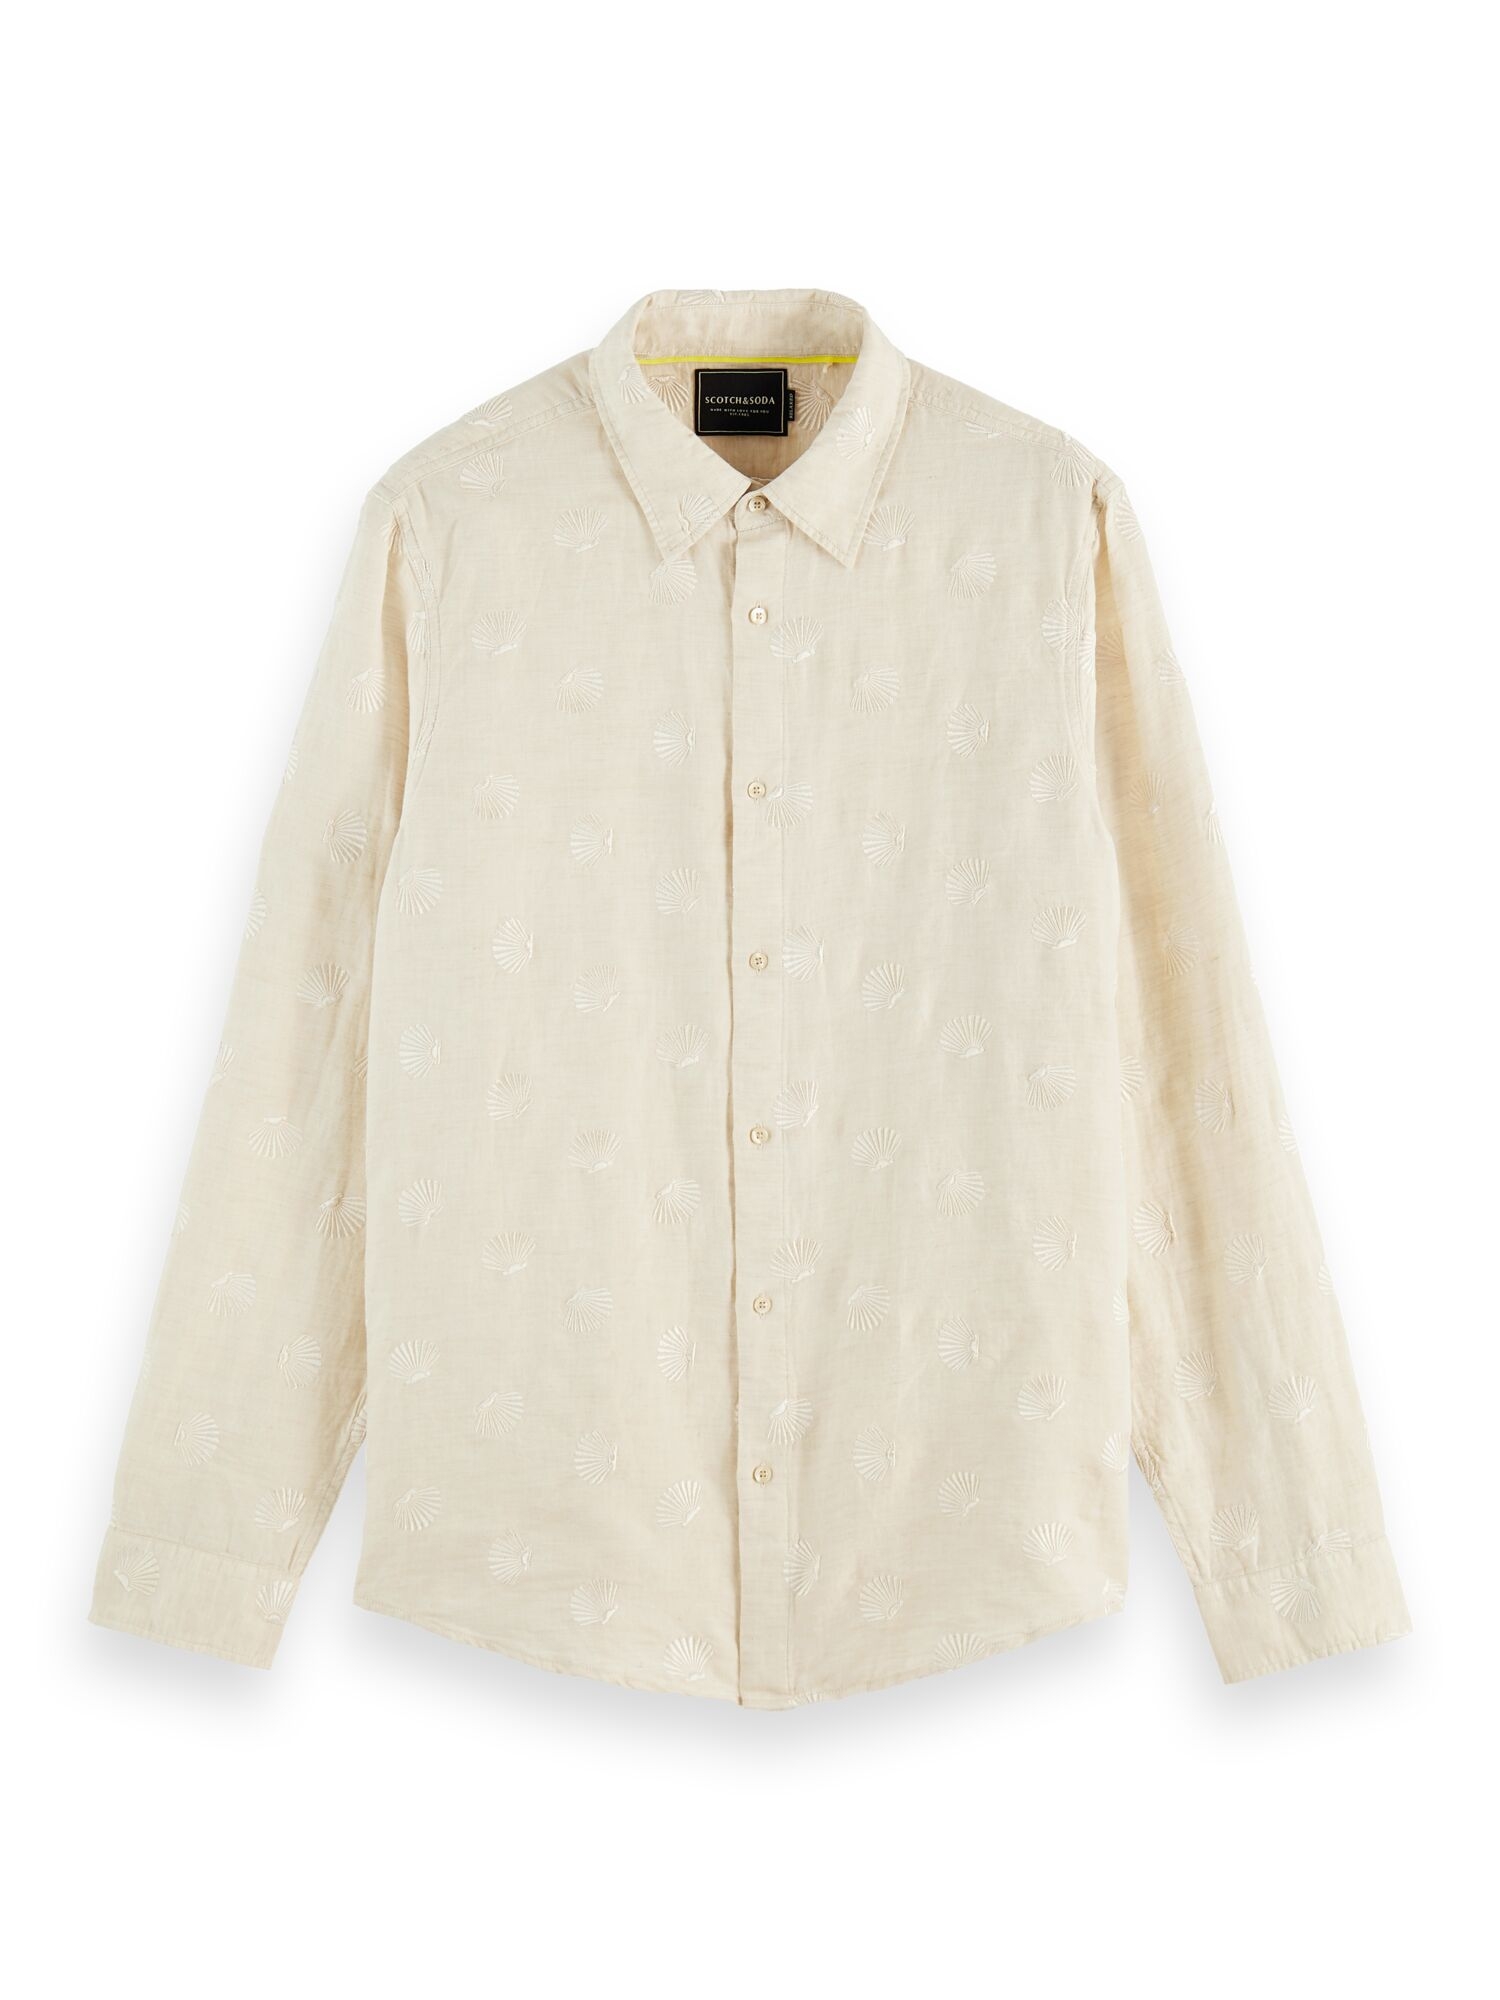 Scotch & Soda | RELAXED FIT- Embroidered organic cotton blend shirt 2